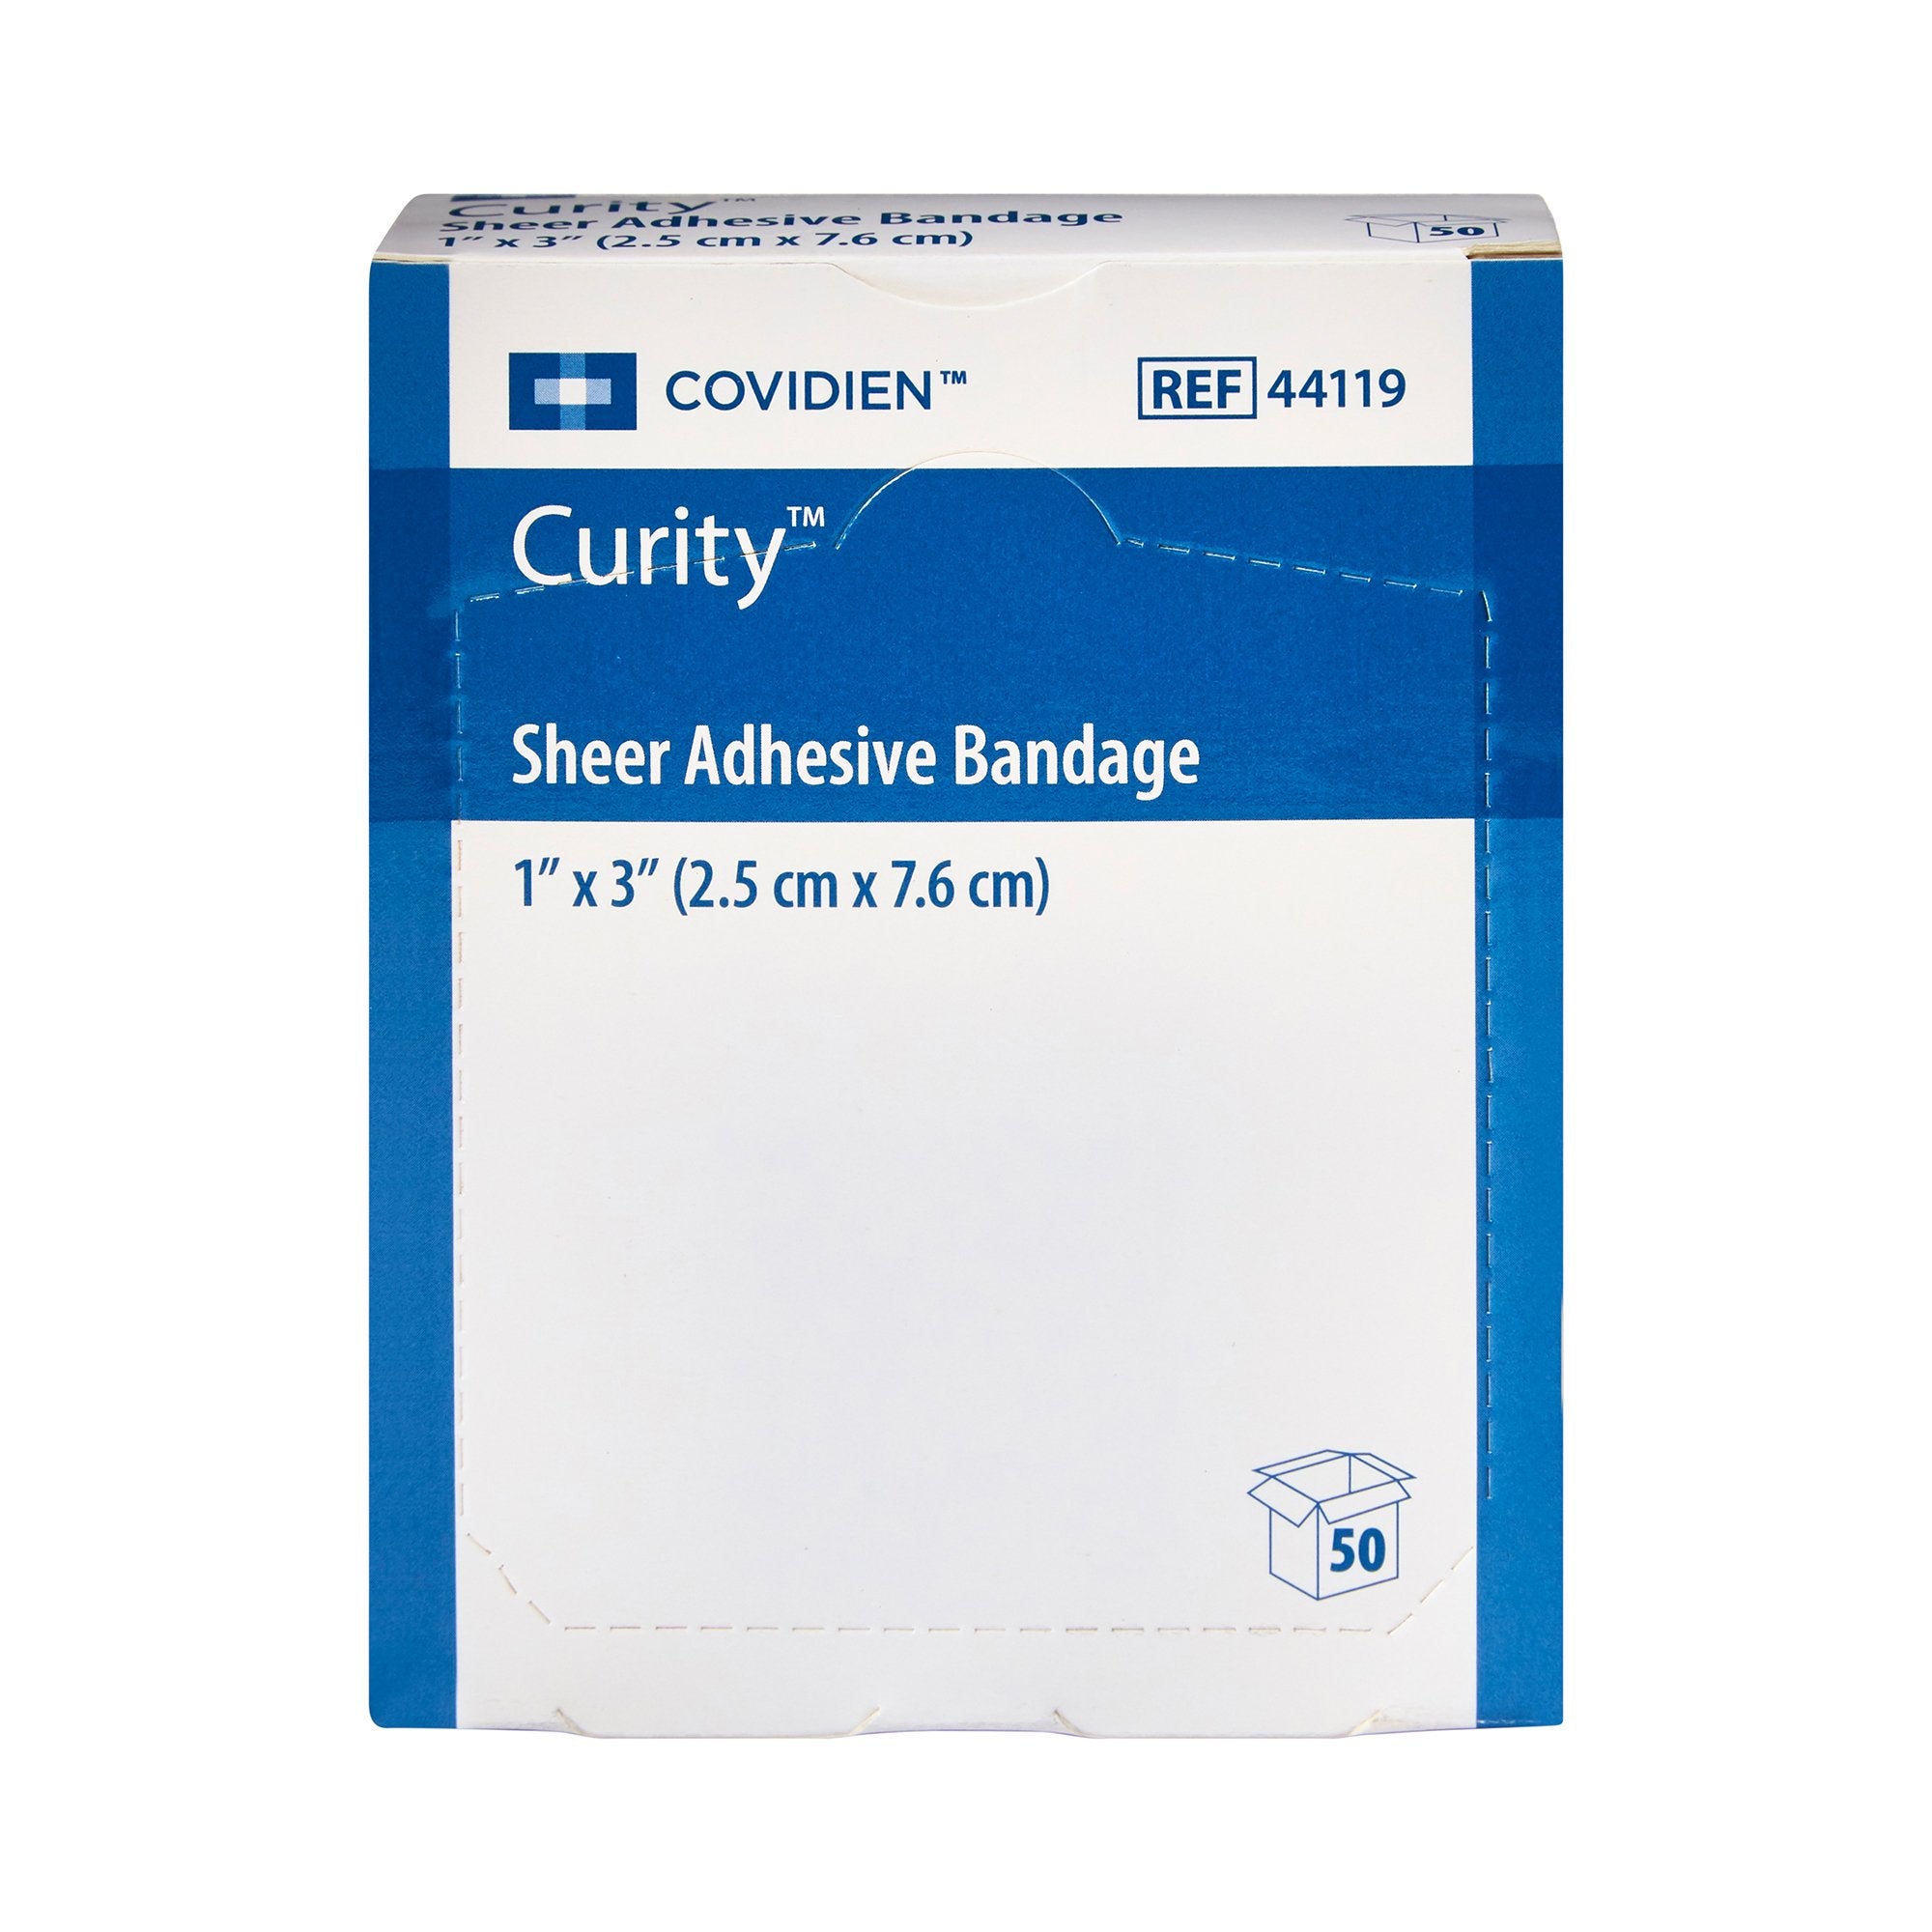 Adhesive Strip Curity™ 1 X 3 Inch Plastic Rectangle Sheer Sterile